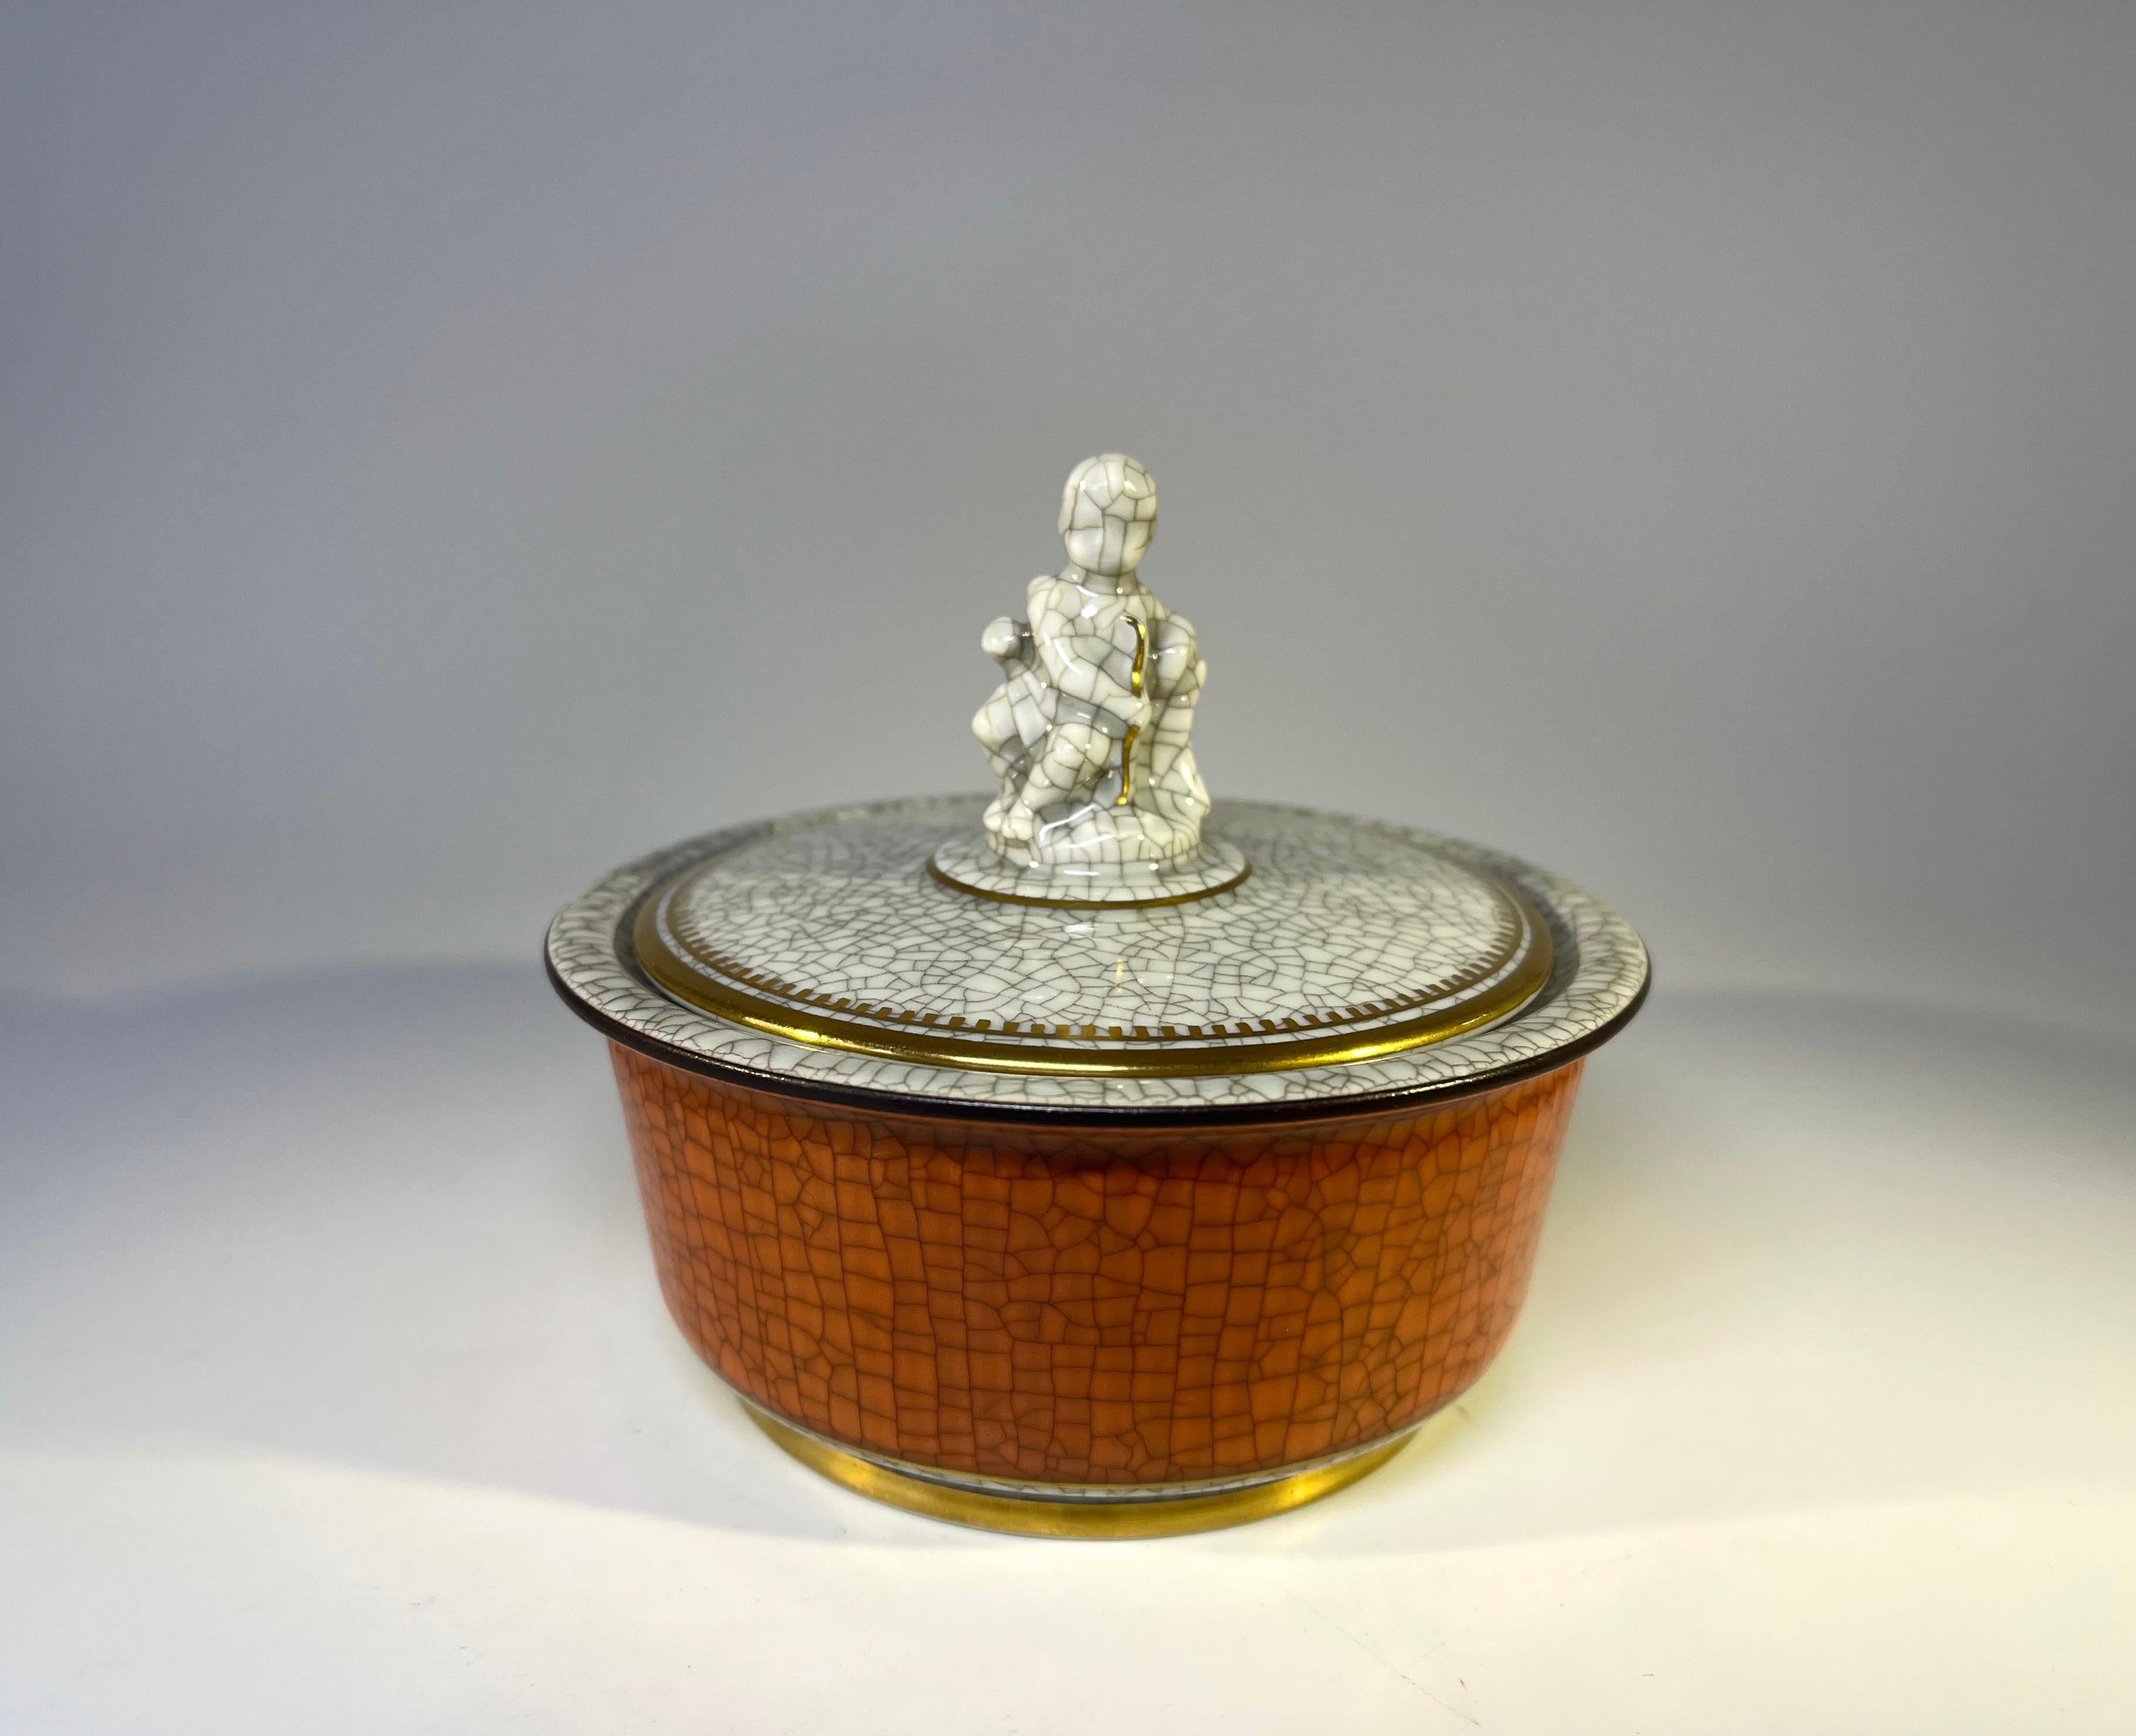 Royal Copenhagen terracotta crackle glaze pot with grey crackle glaze lid adorned with figural Cupid.
Decorated with gilt banding. 
Signed and numbered 2936
Circa 1954
Height 3.5 inch, Diameter 4.25 inch
In excellent condition. 